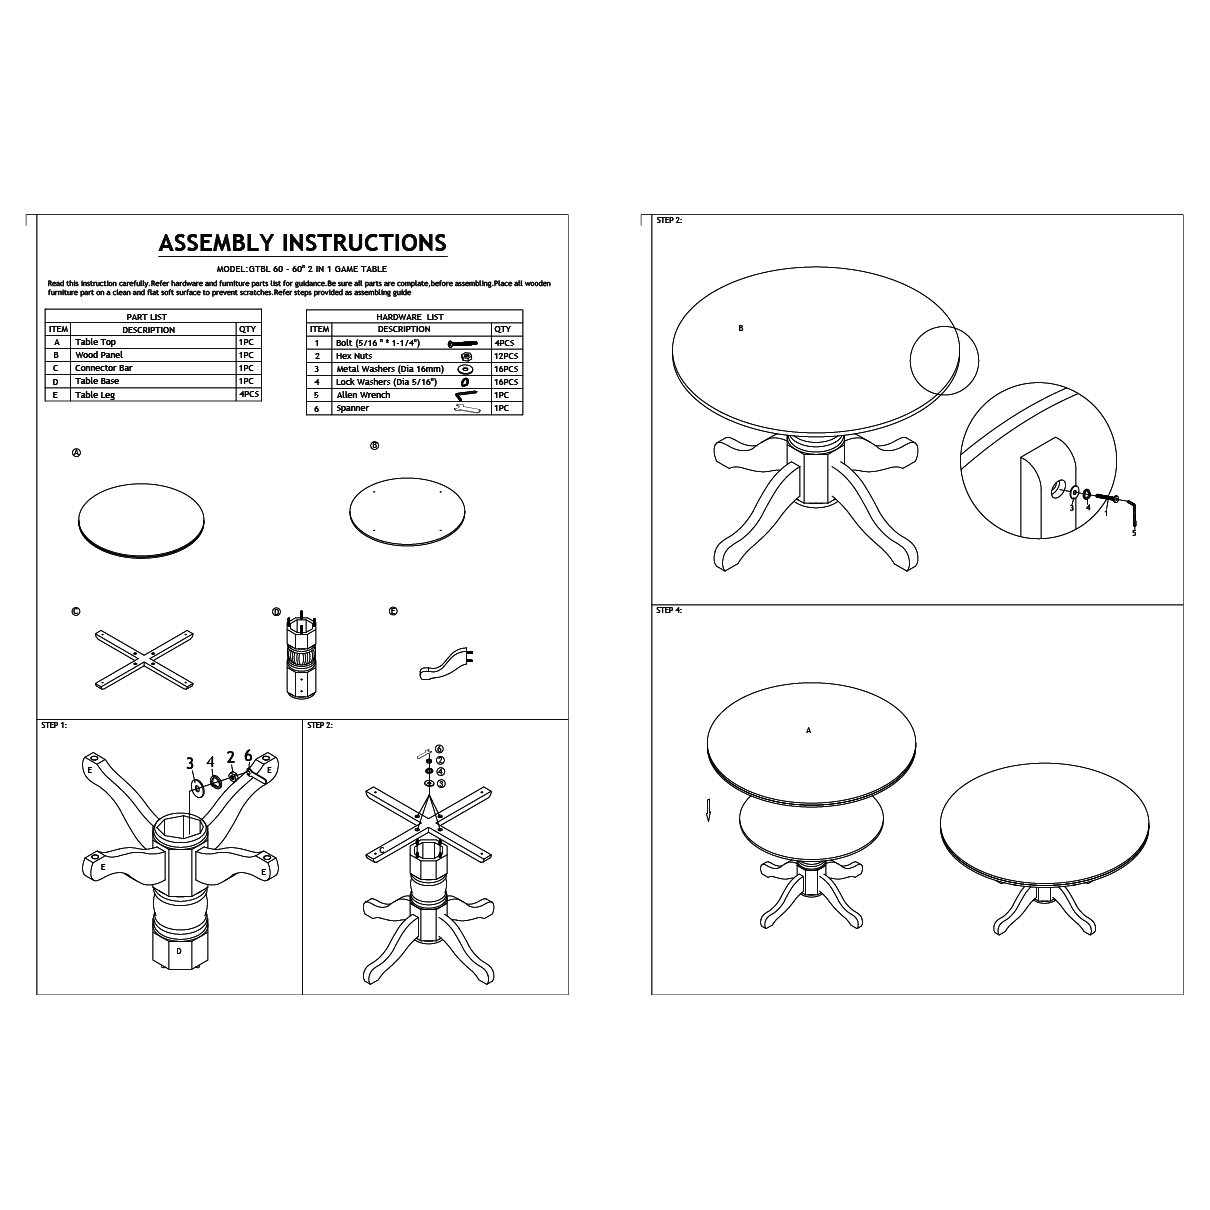  Assembly Instructions